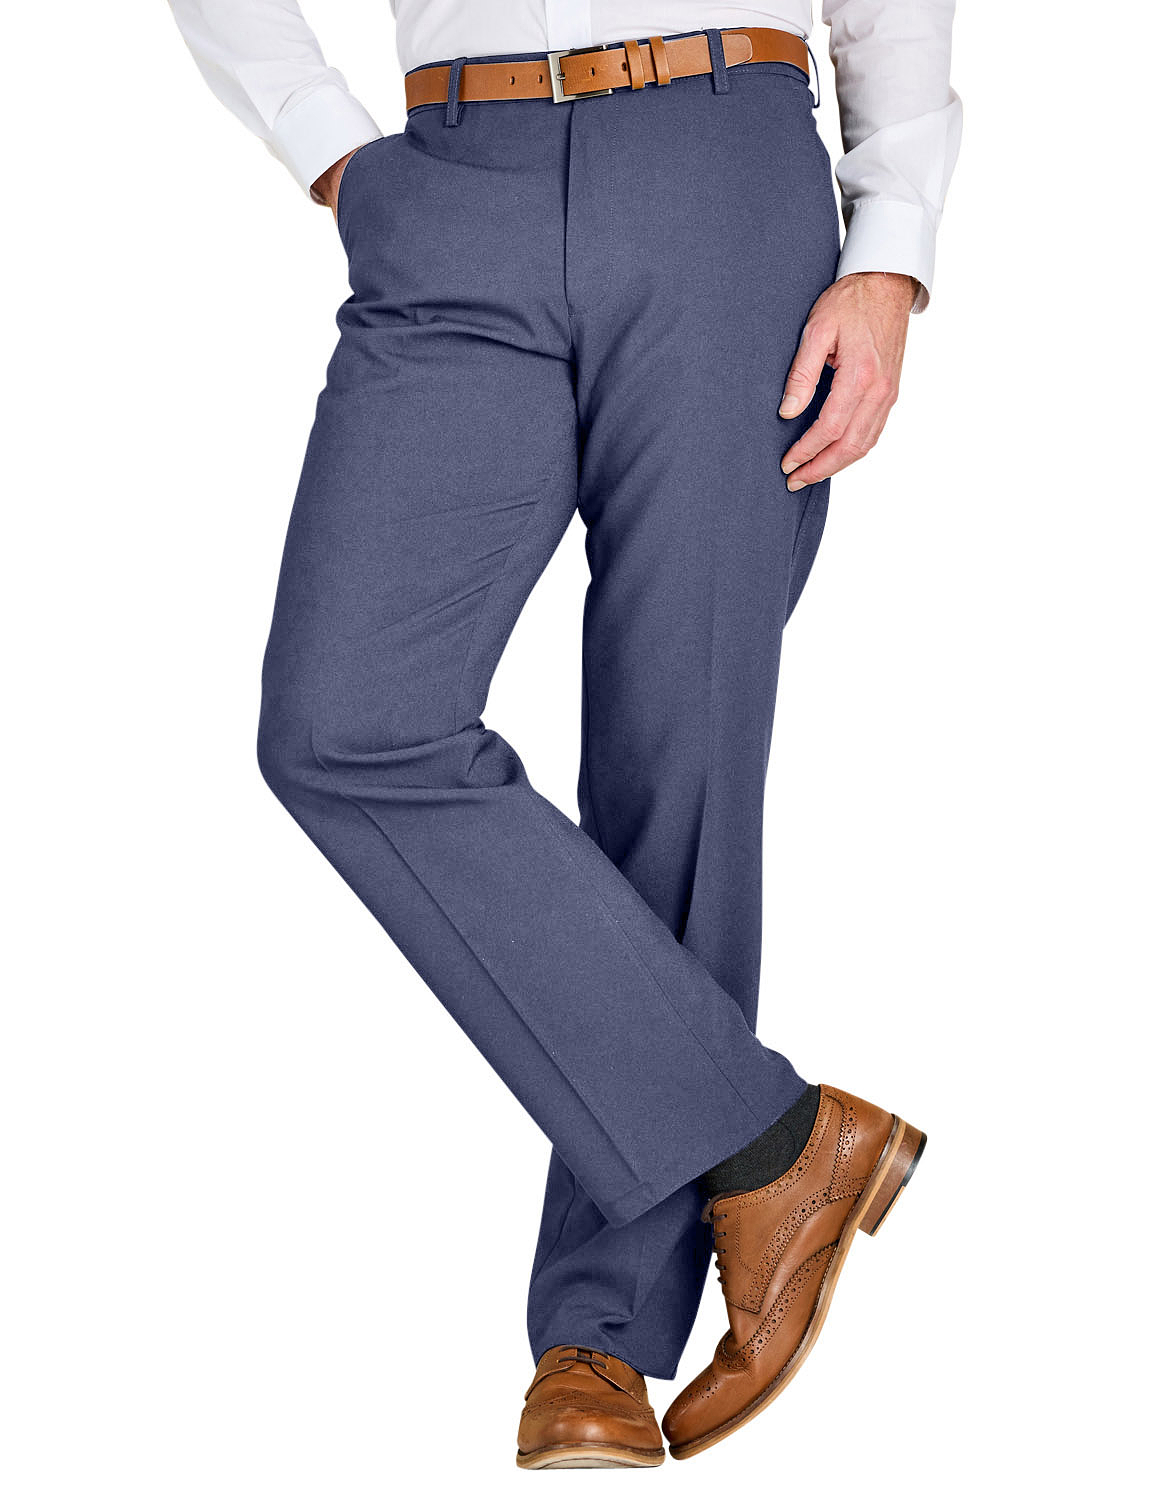 Image result for trousers